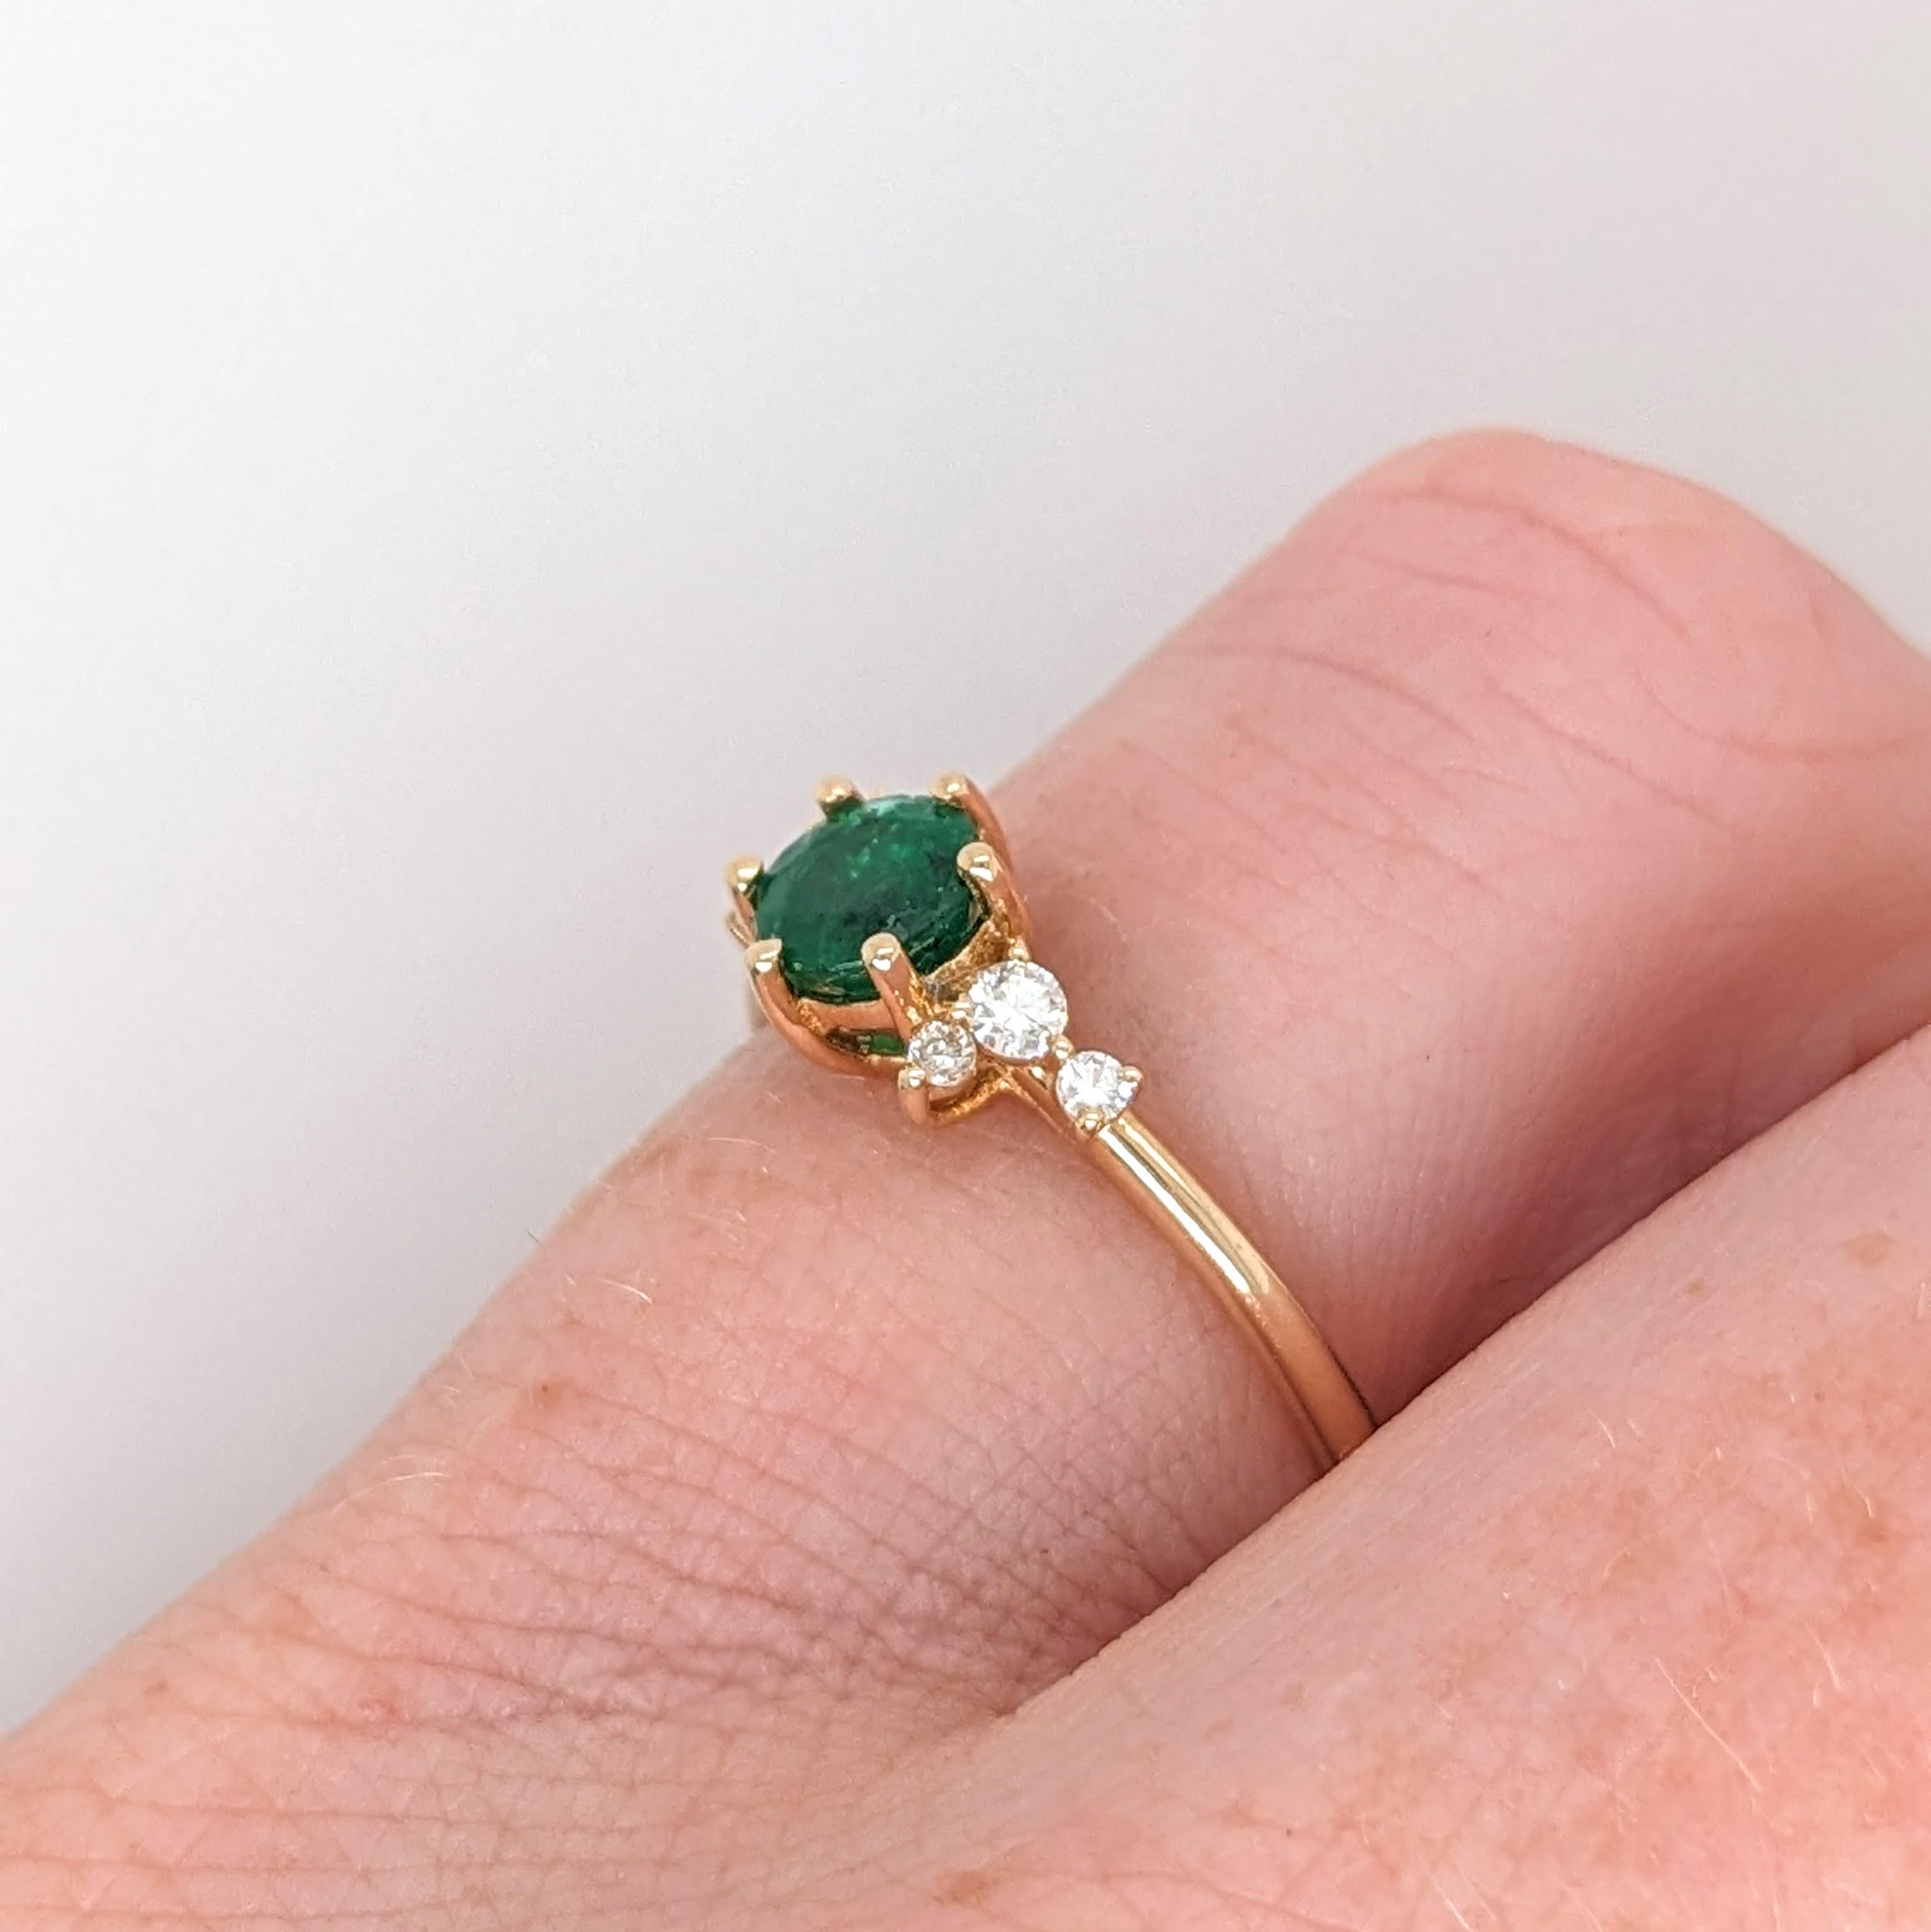 Green Emerald Ring w Natural Diamonds in Solid 14k Yellow Gold Round 5mm 2